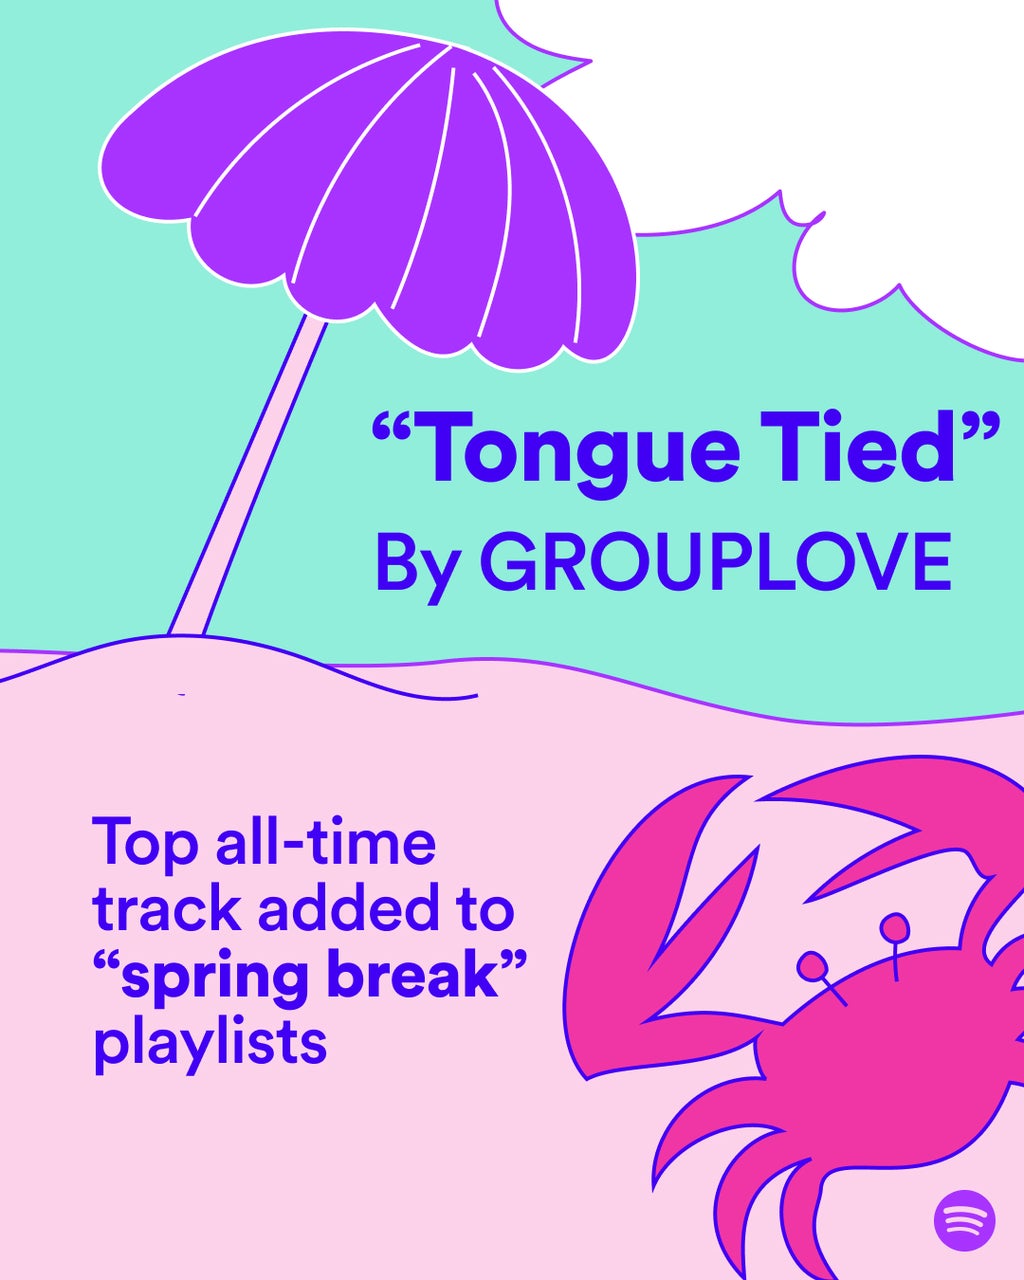 Tongue Tied by Grouplove graphic with a crab and an umbrella